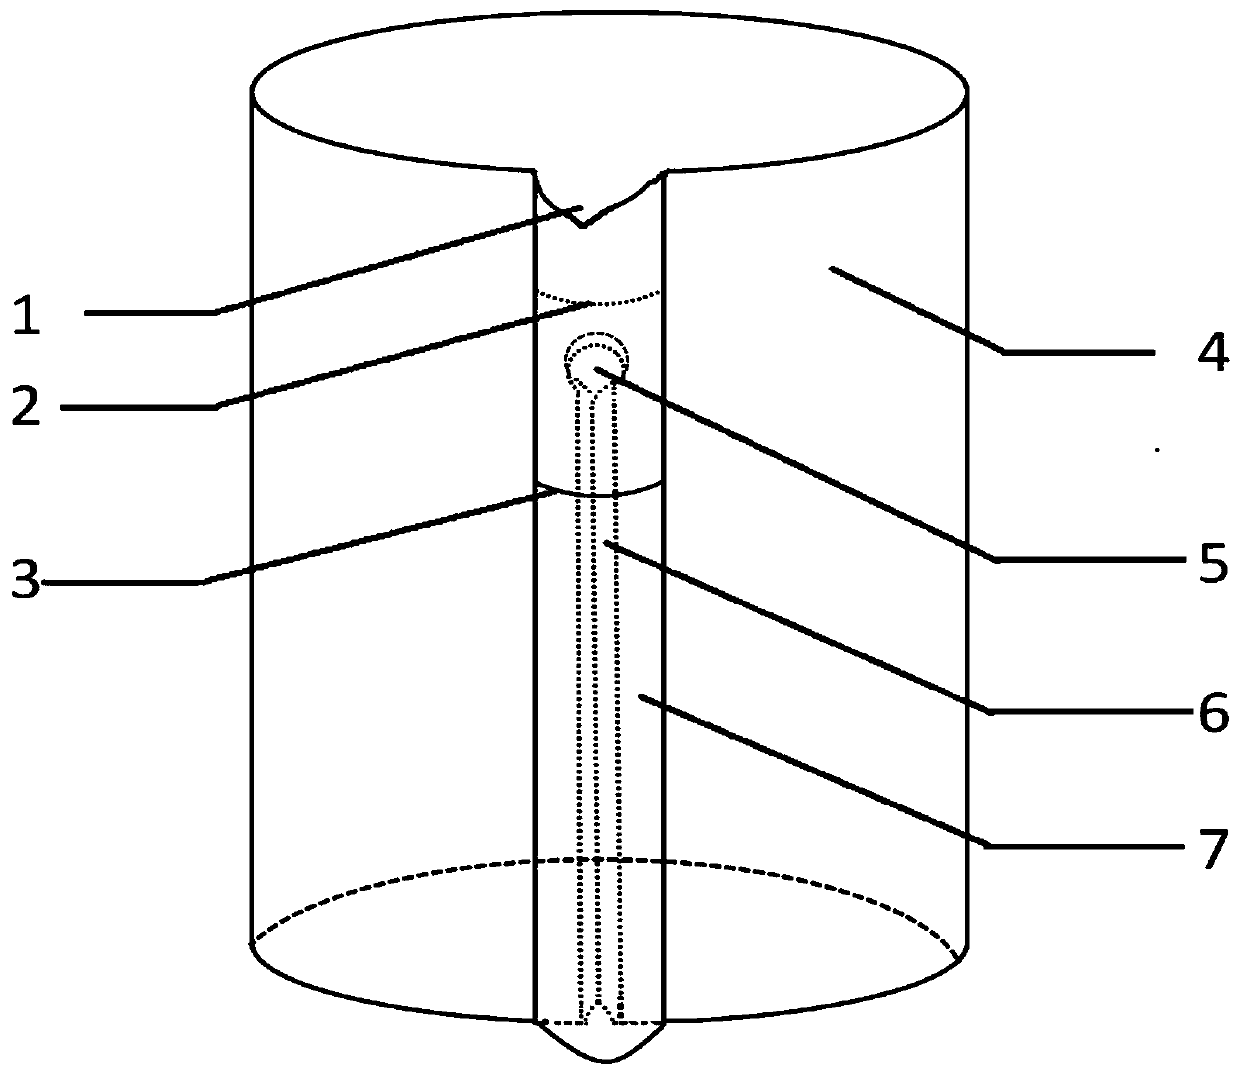 Cup wall overflow type constant volume cup